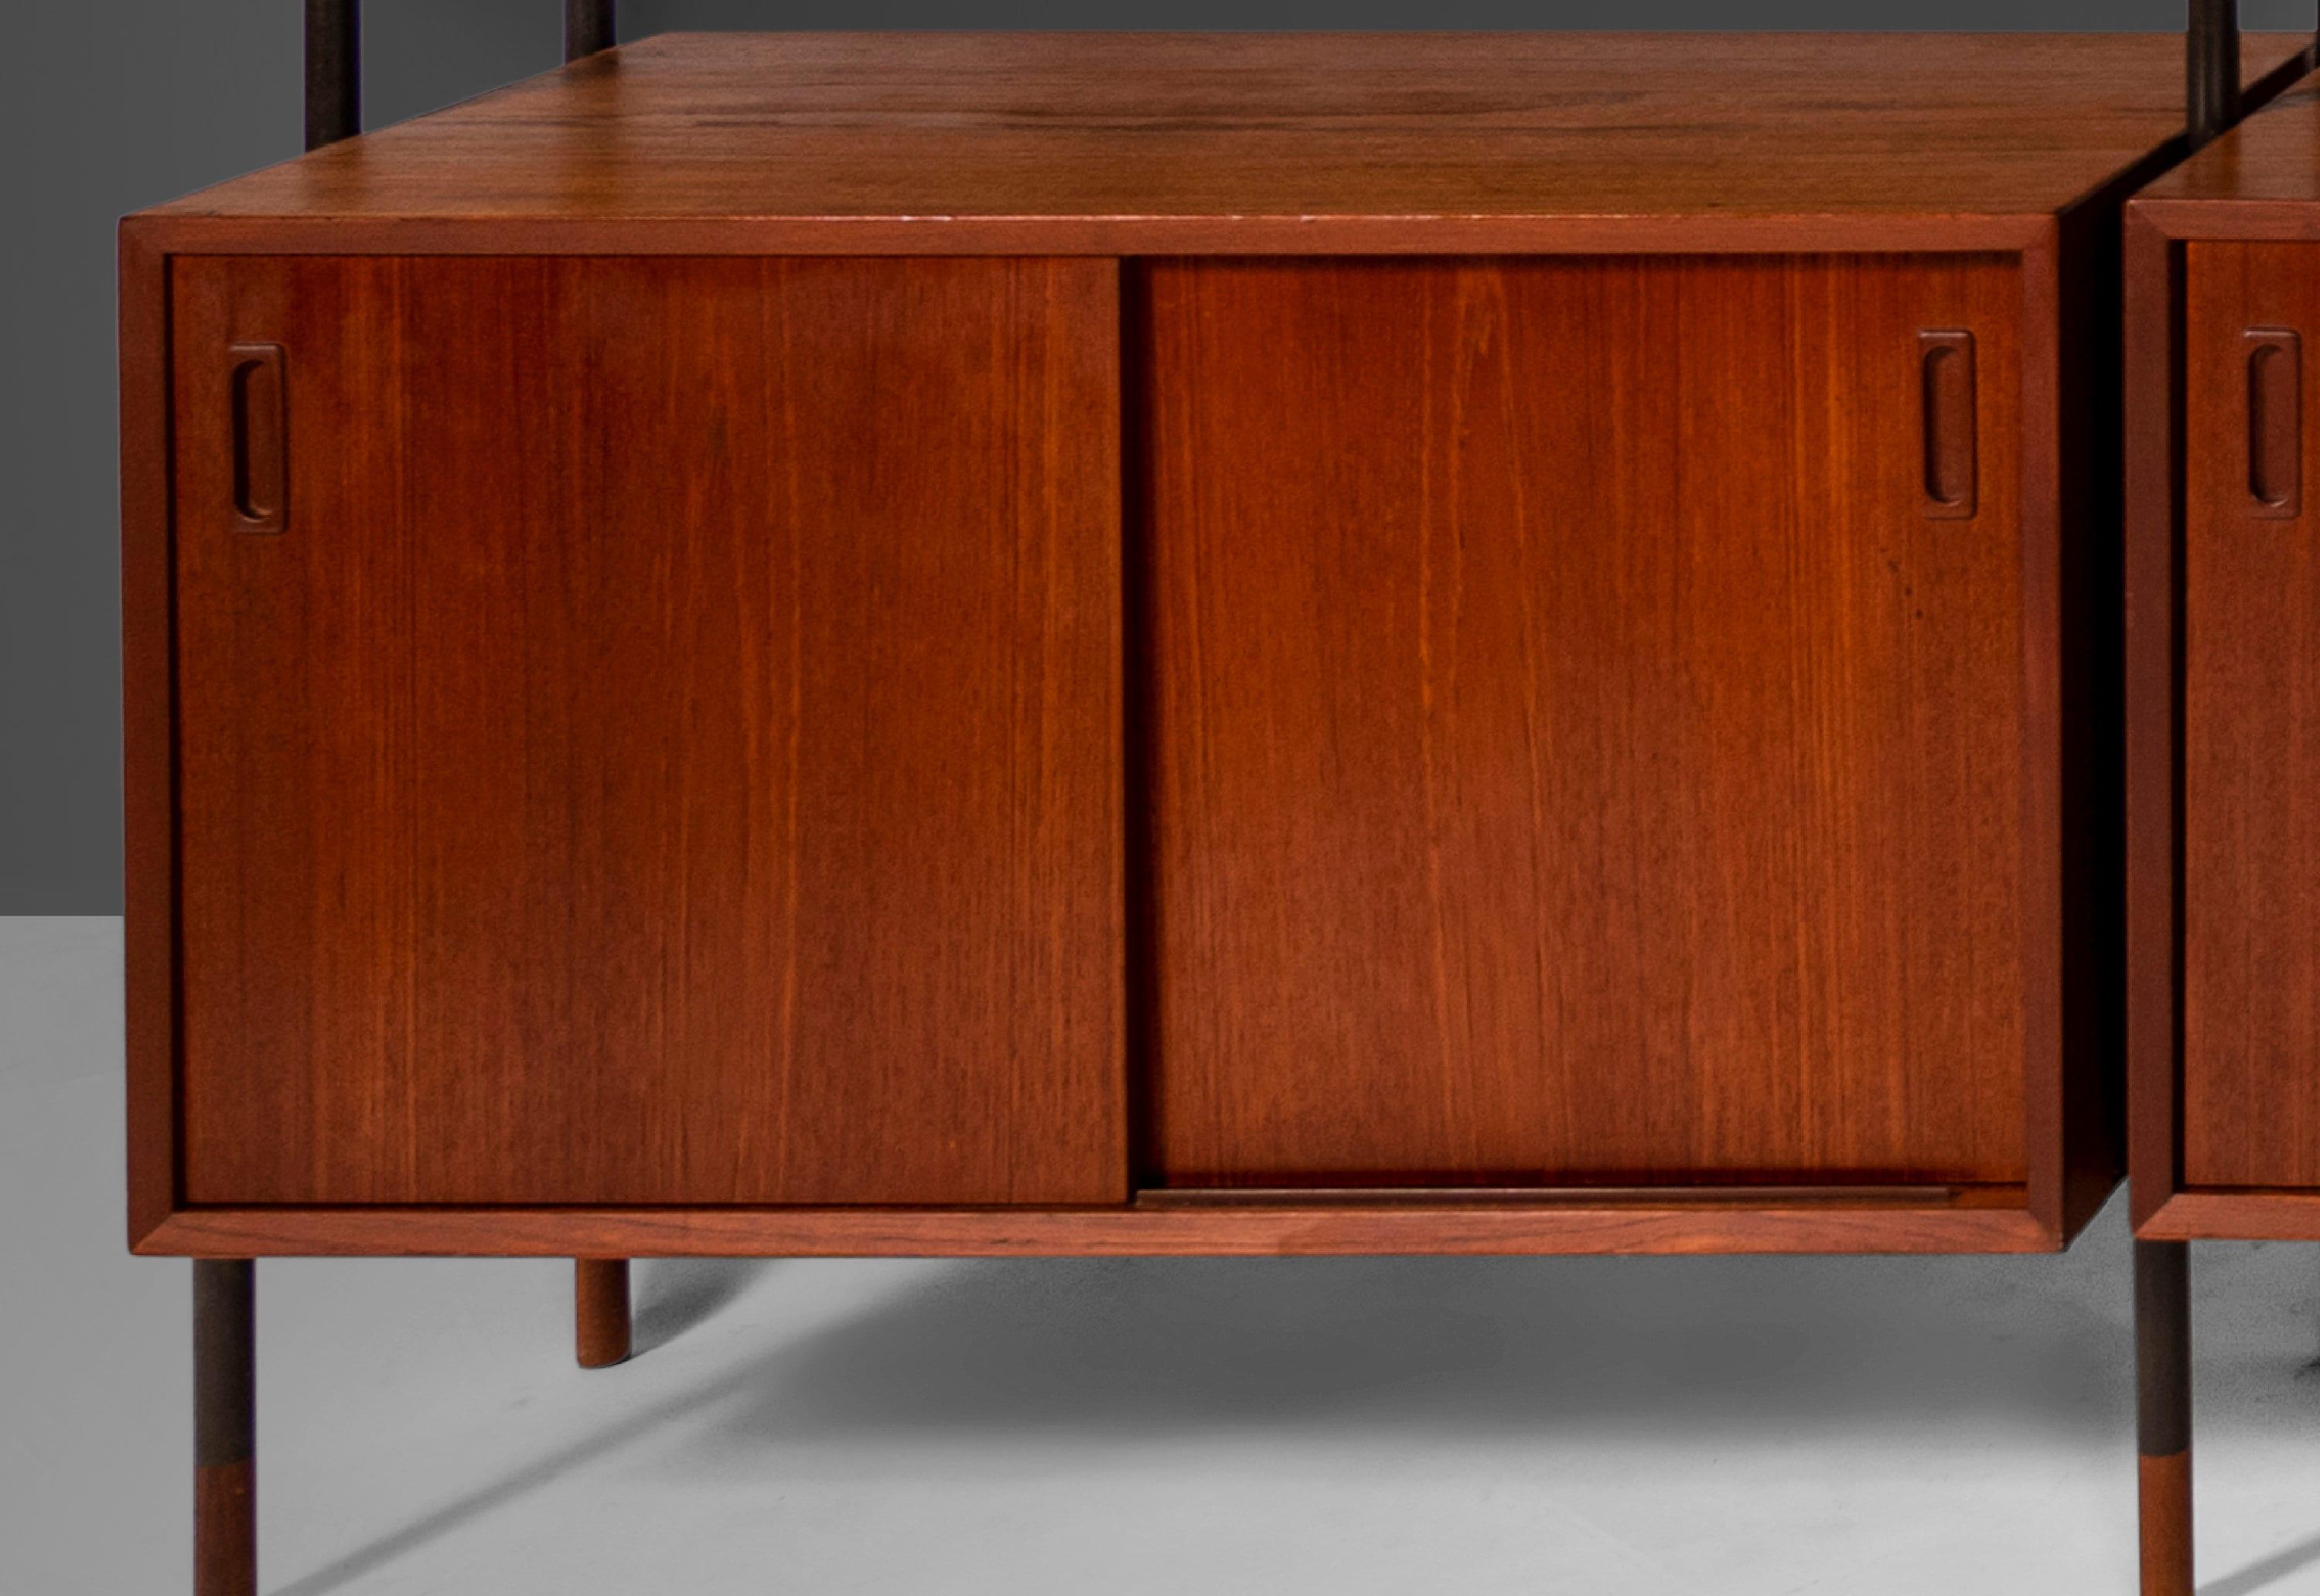 Mid-20th Century Danish Modern Modular 4 Bay Wall Unit by Lyby Mobler, c. 1960 For Sale